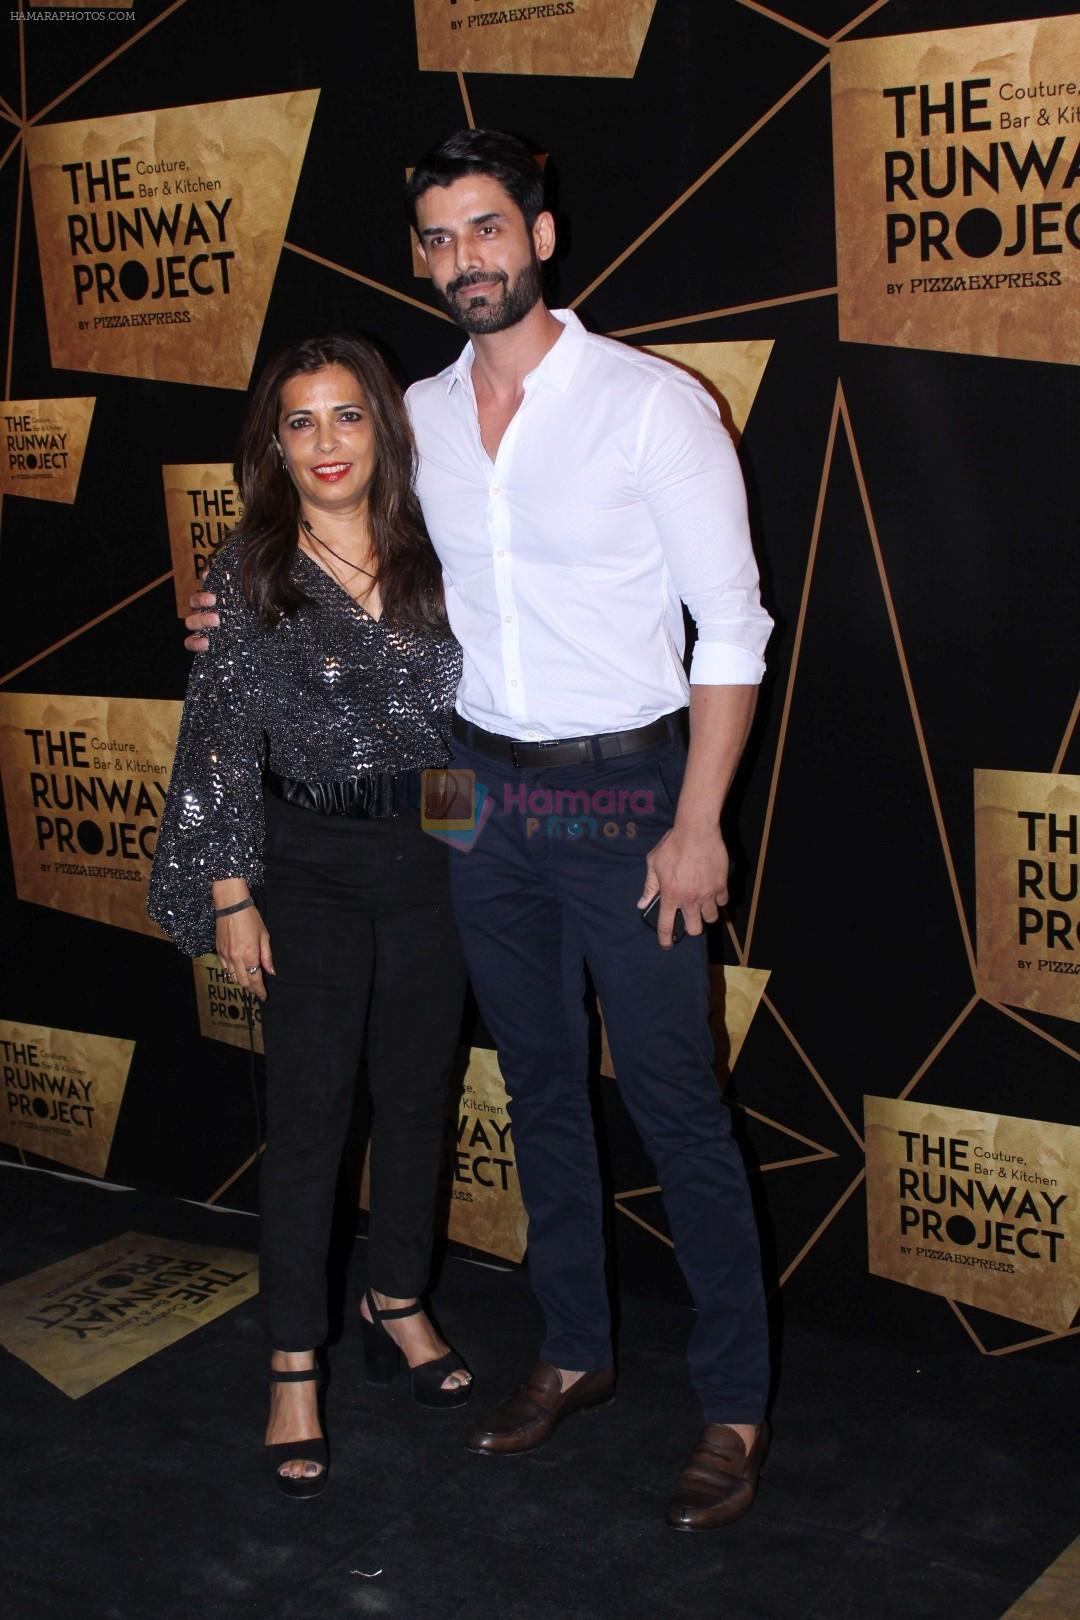 Ameet Gaur at the Red Carpet Of The Runway Project on 20th Nov 2017